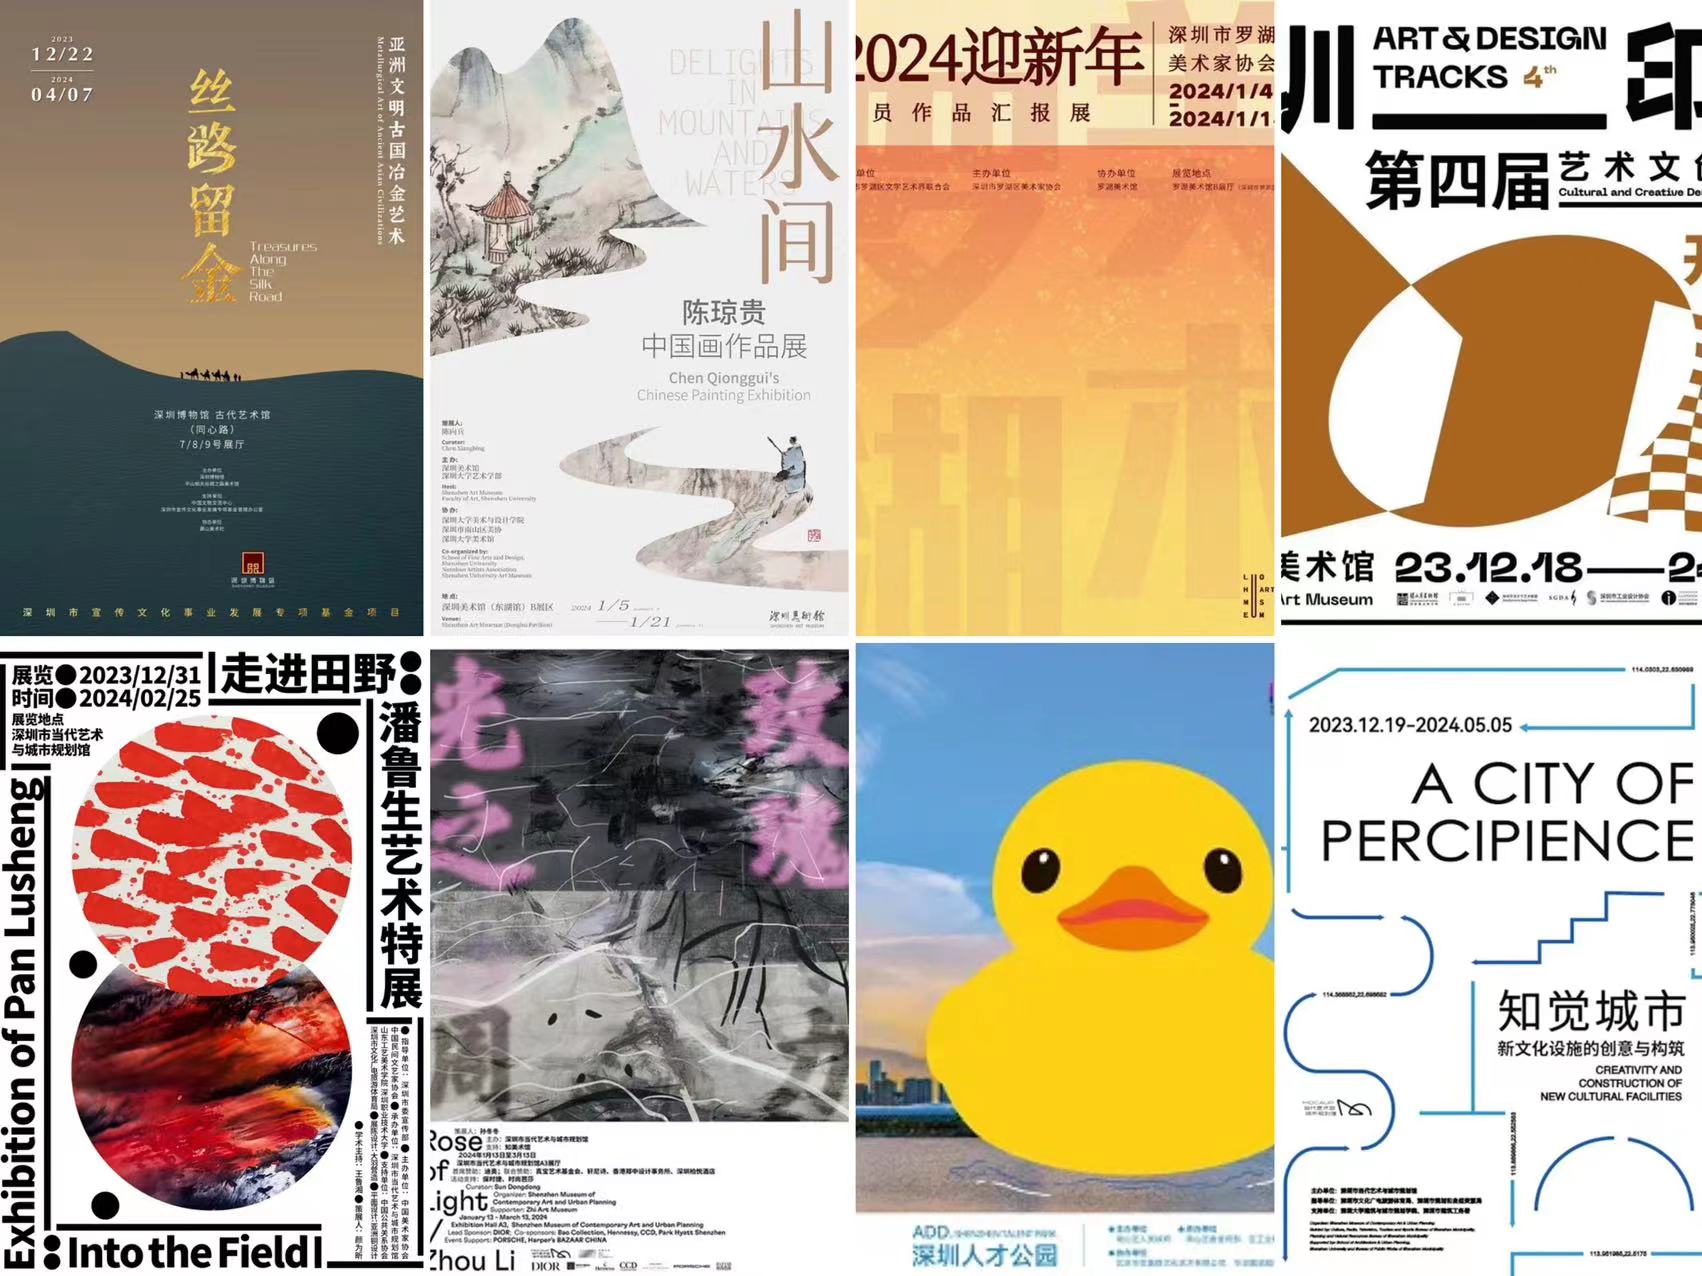 30 Amazing Art Shows This January in Shenzhen